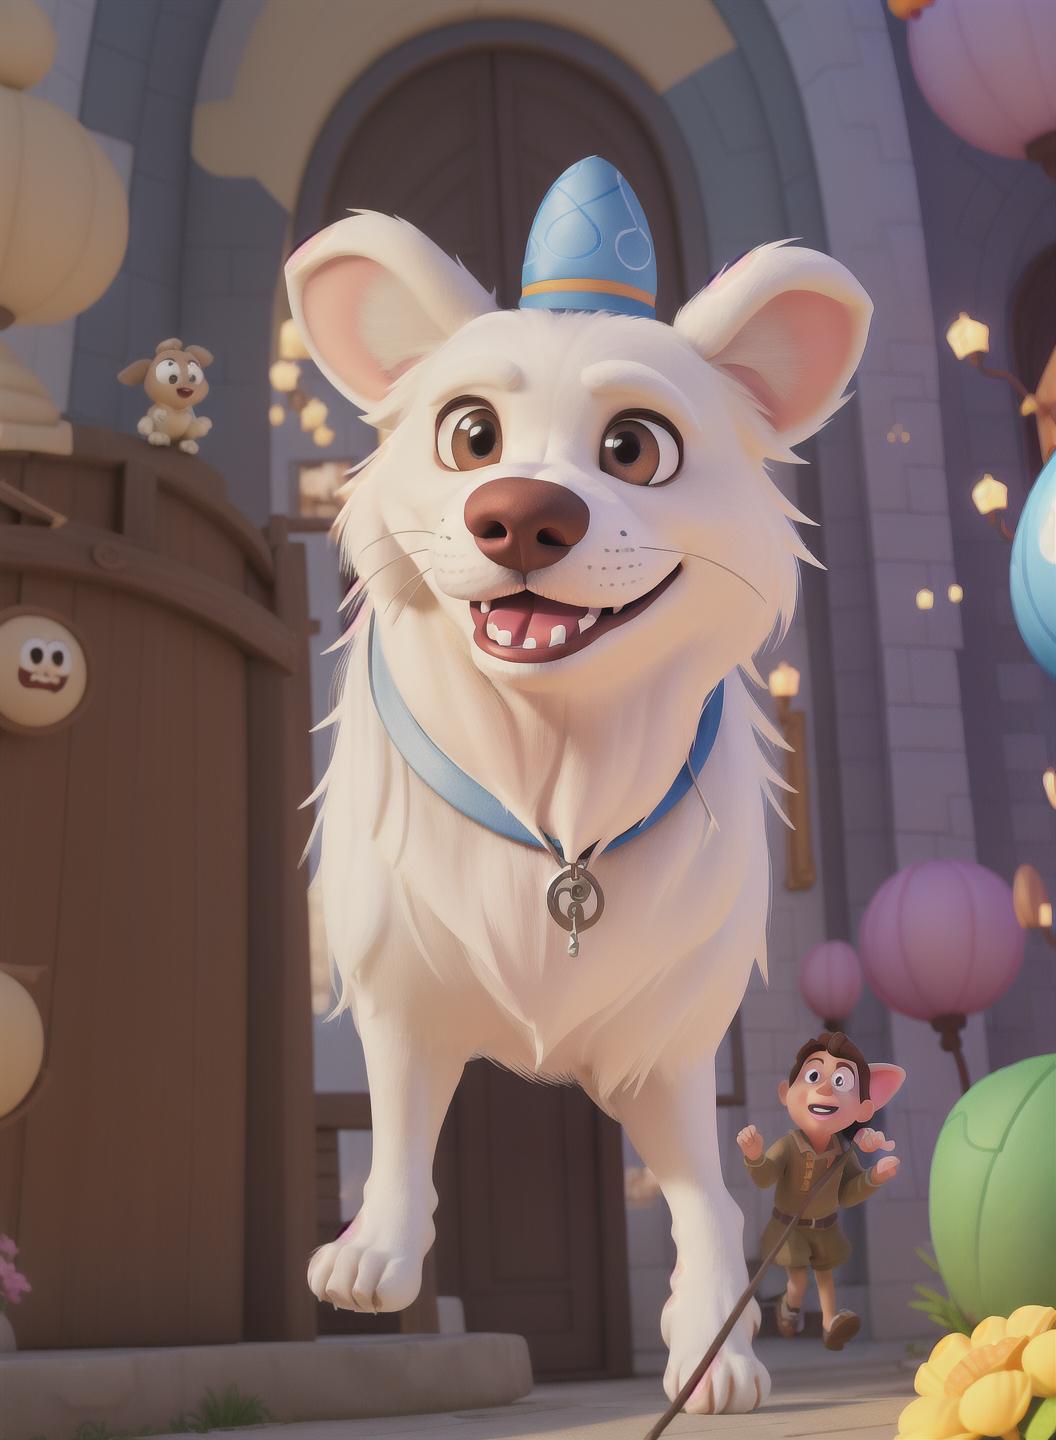  masterpiece, best quality, A Disney Pixar-inspired movie poster with the
title of “Fufu”,in the imagea A white dog with standing ears and fried fur, a dog with double eyelids and a mole on its nose, a dog loves  ing and running.The background of image is
a Disney castle with colourful flowers.The scene should be
in a distinct digital art style of Pixar, with a focus on character expressions, vibrant colors and detailed textures that are characteristic of their animation.